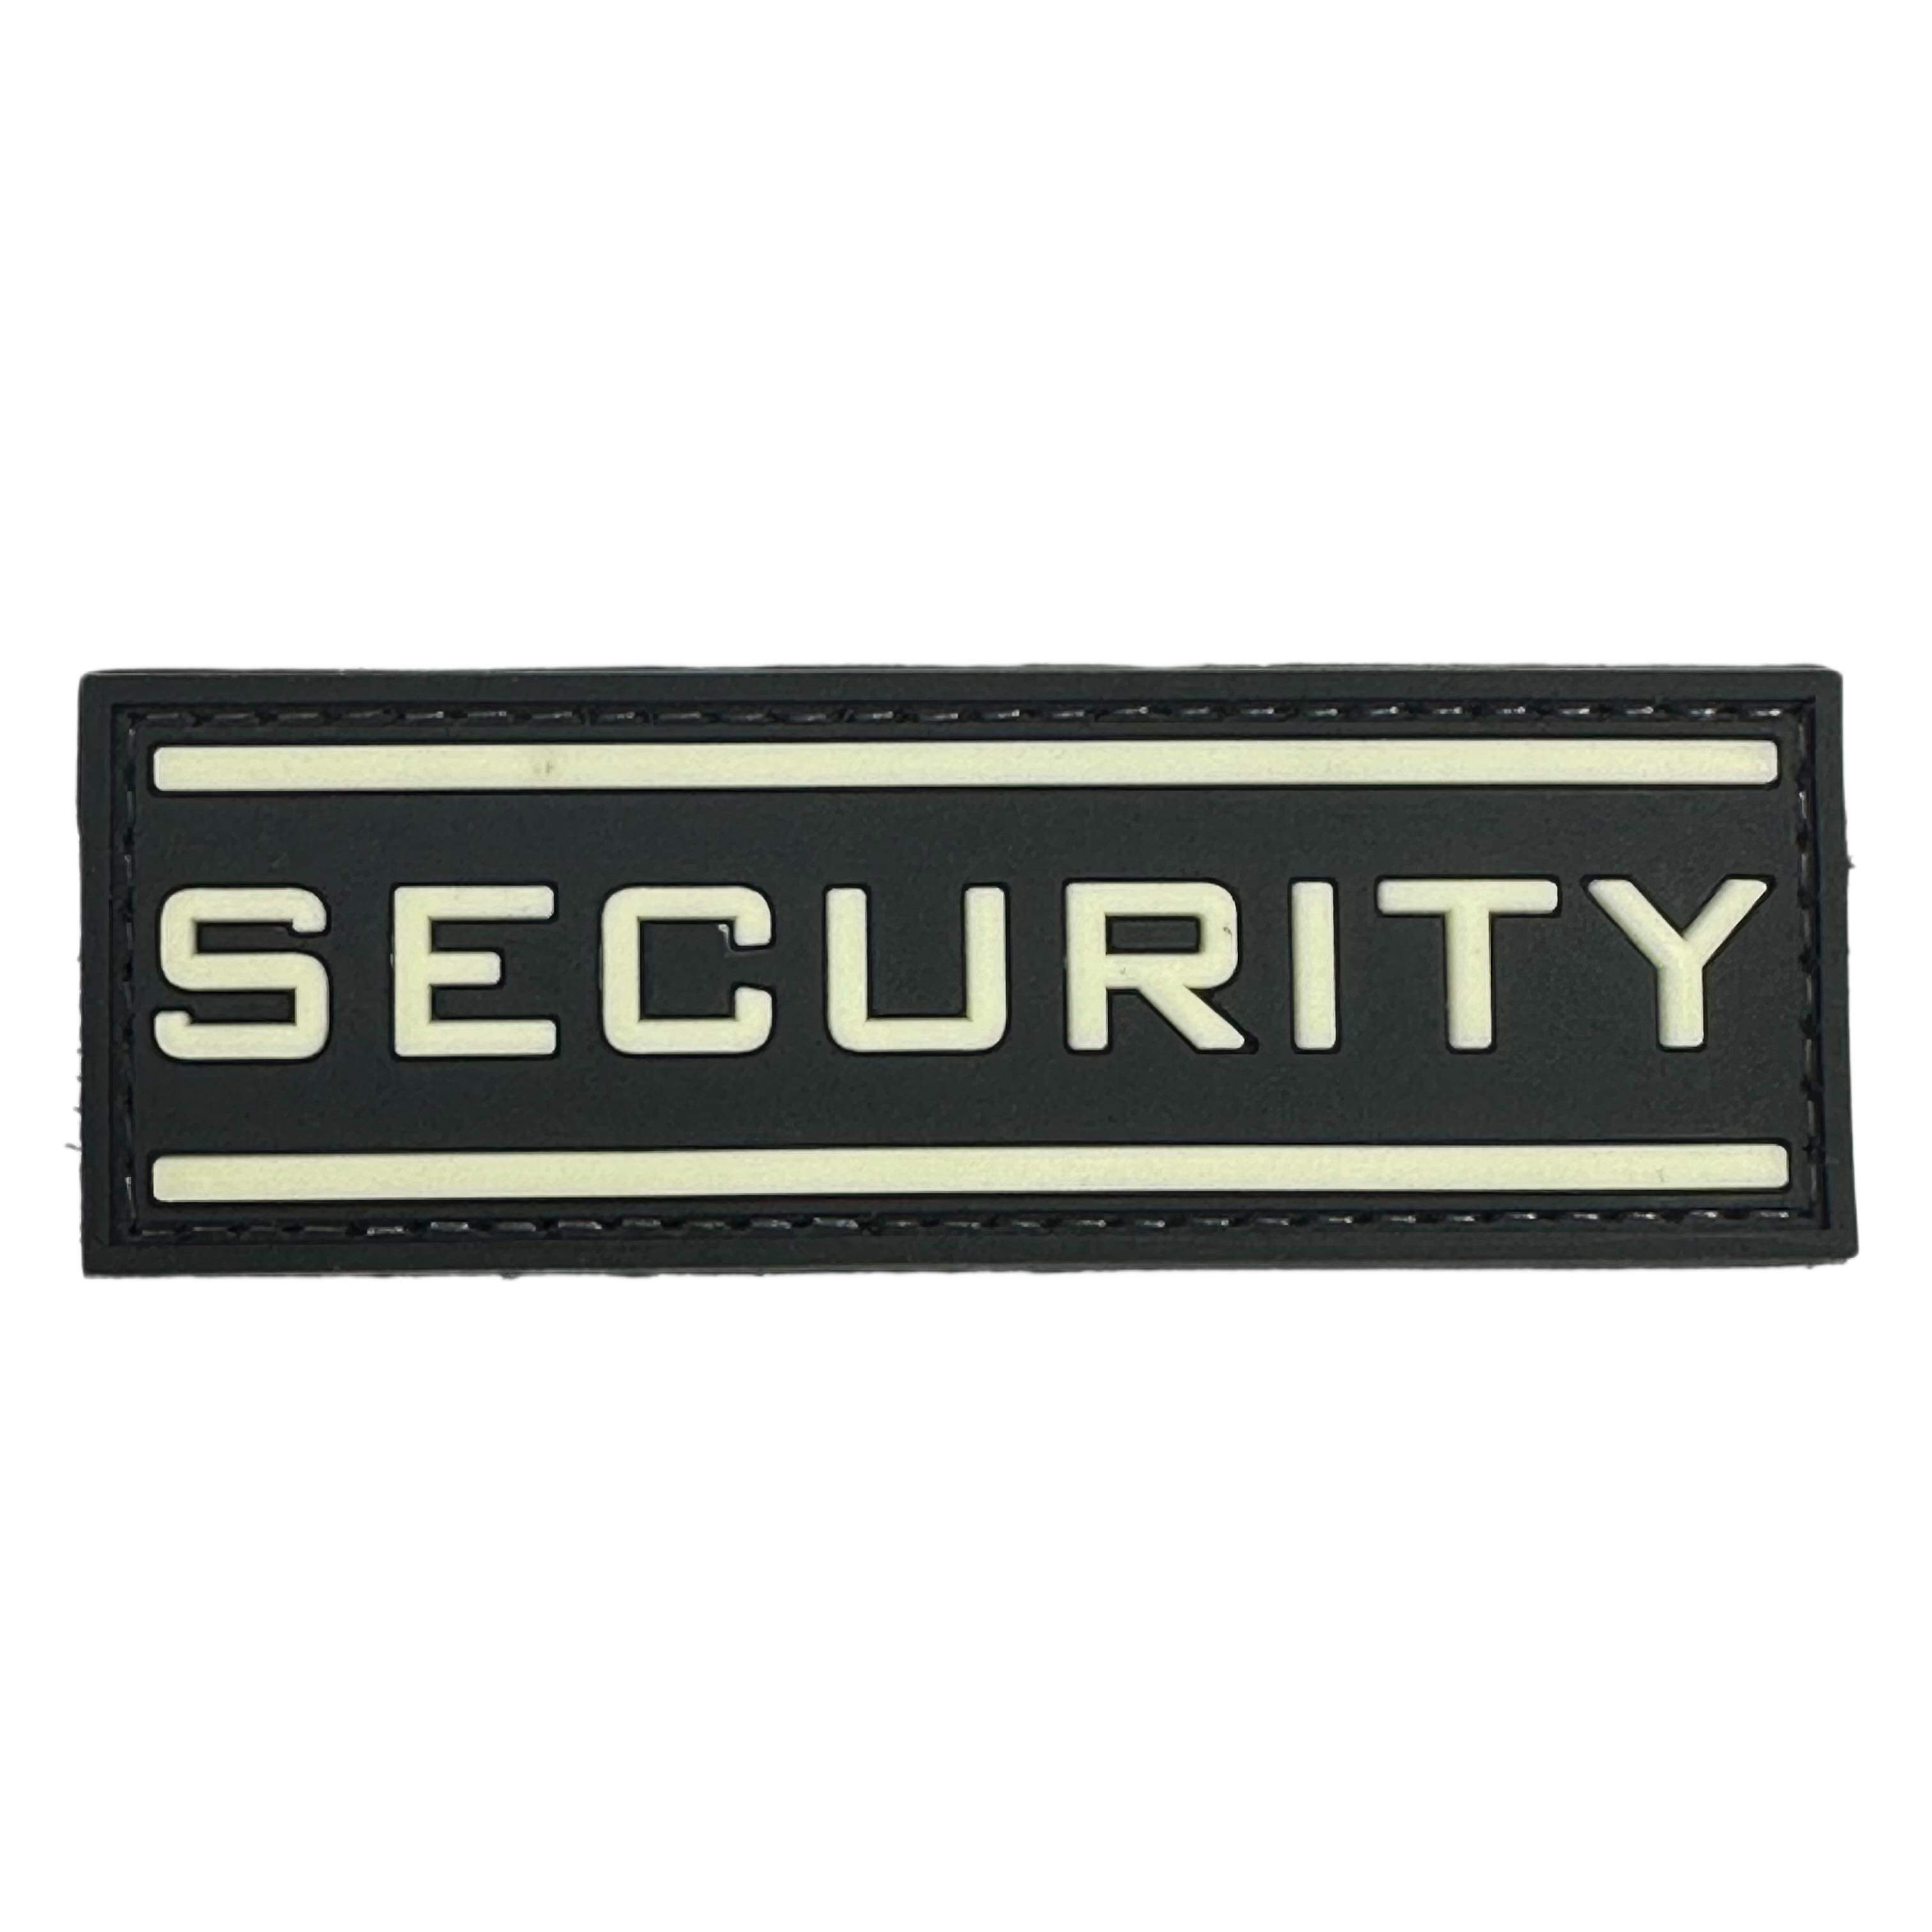 Rubber Patch - Security Large (Glow in the Dark)